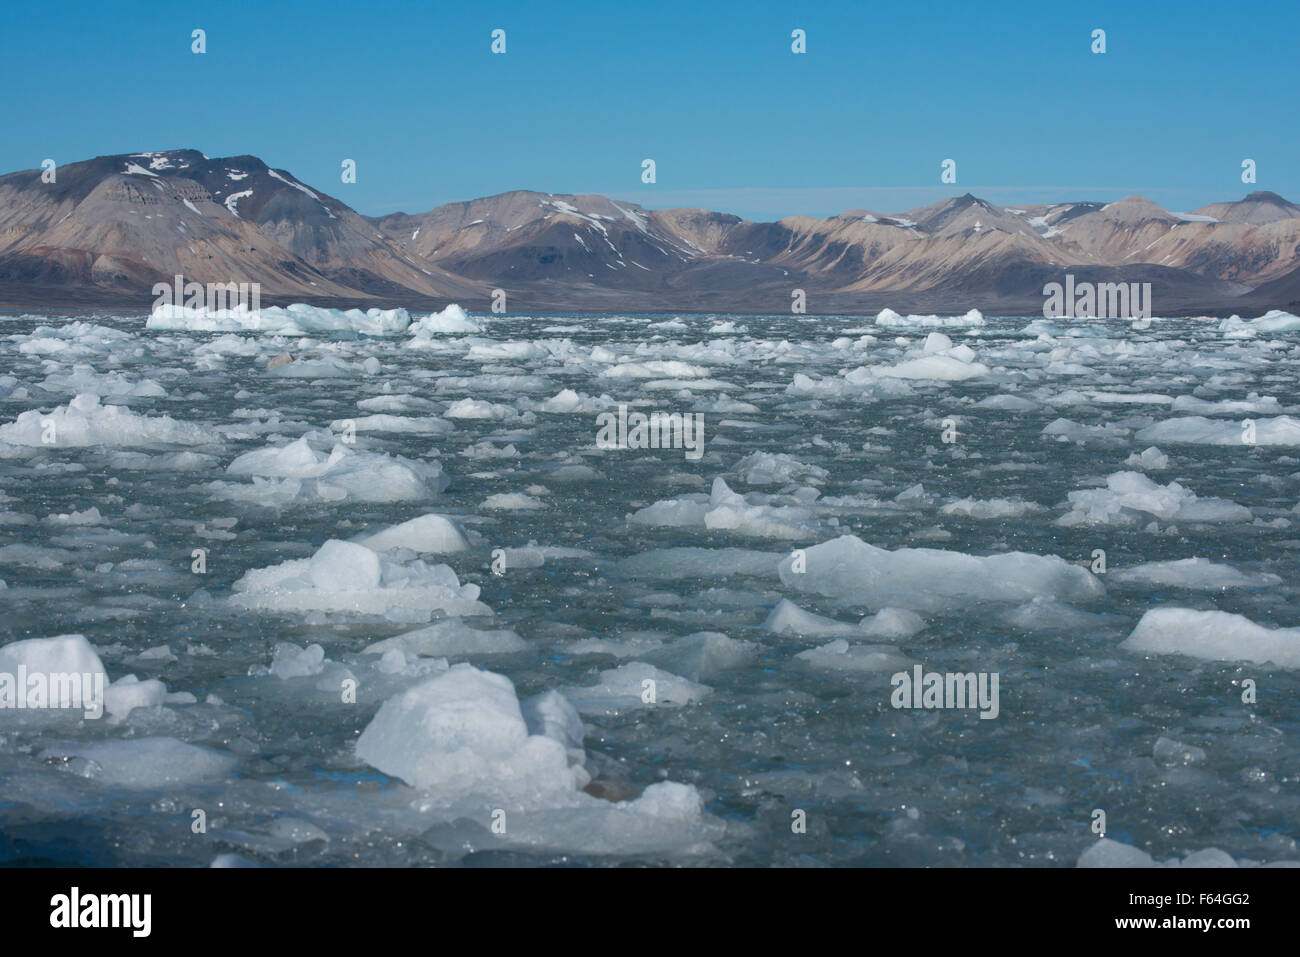 Norway, Barents Sea, Svalbard, Spitsbergen, 14th July Glacier (79° 07' 33' N - 11° 48' 05' E) Ice filled bay. Stock Photo